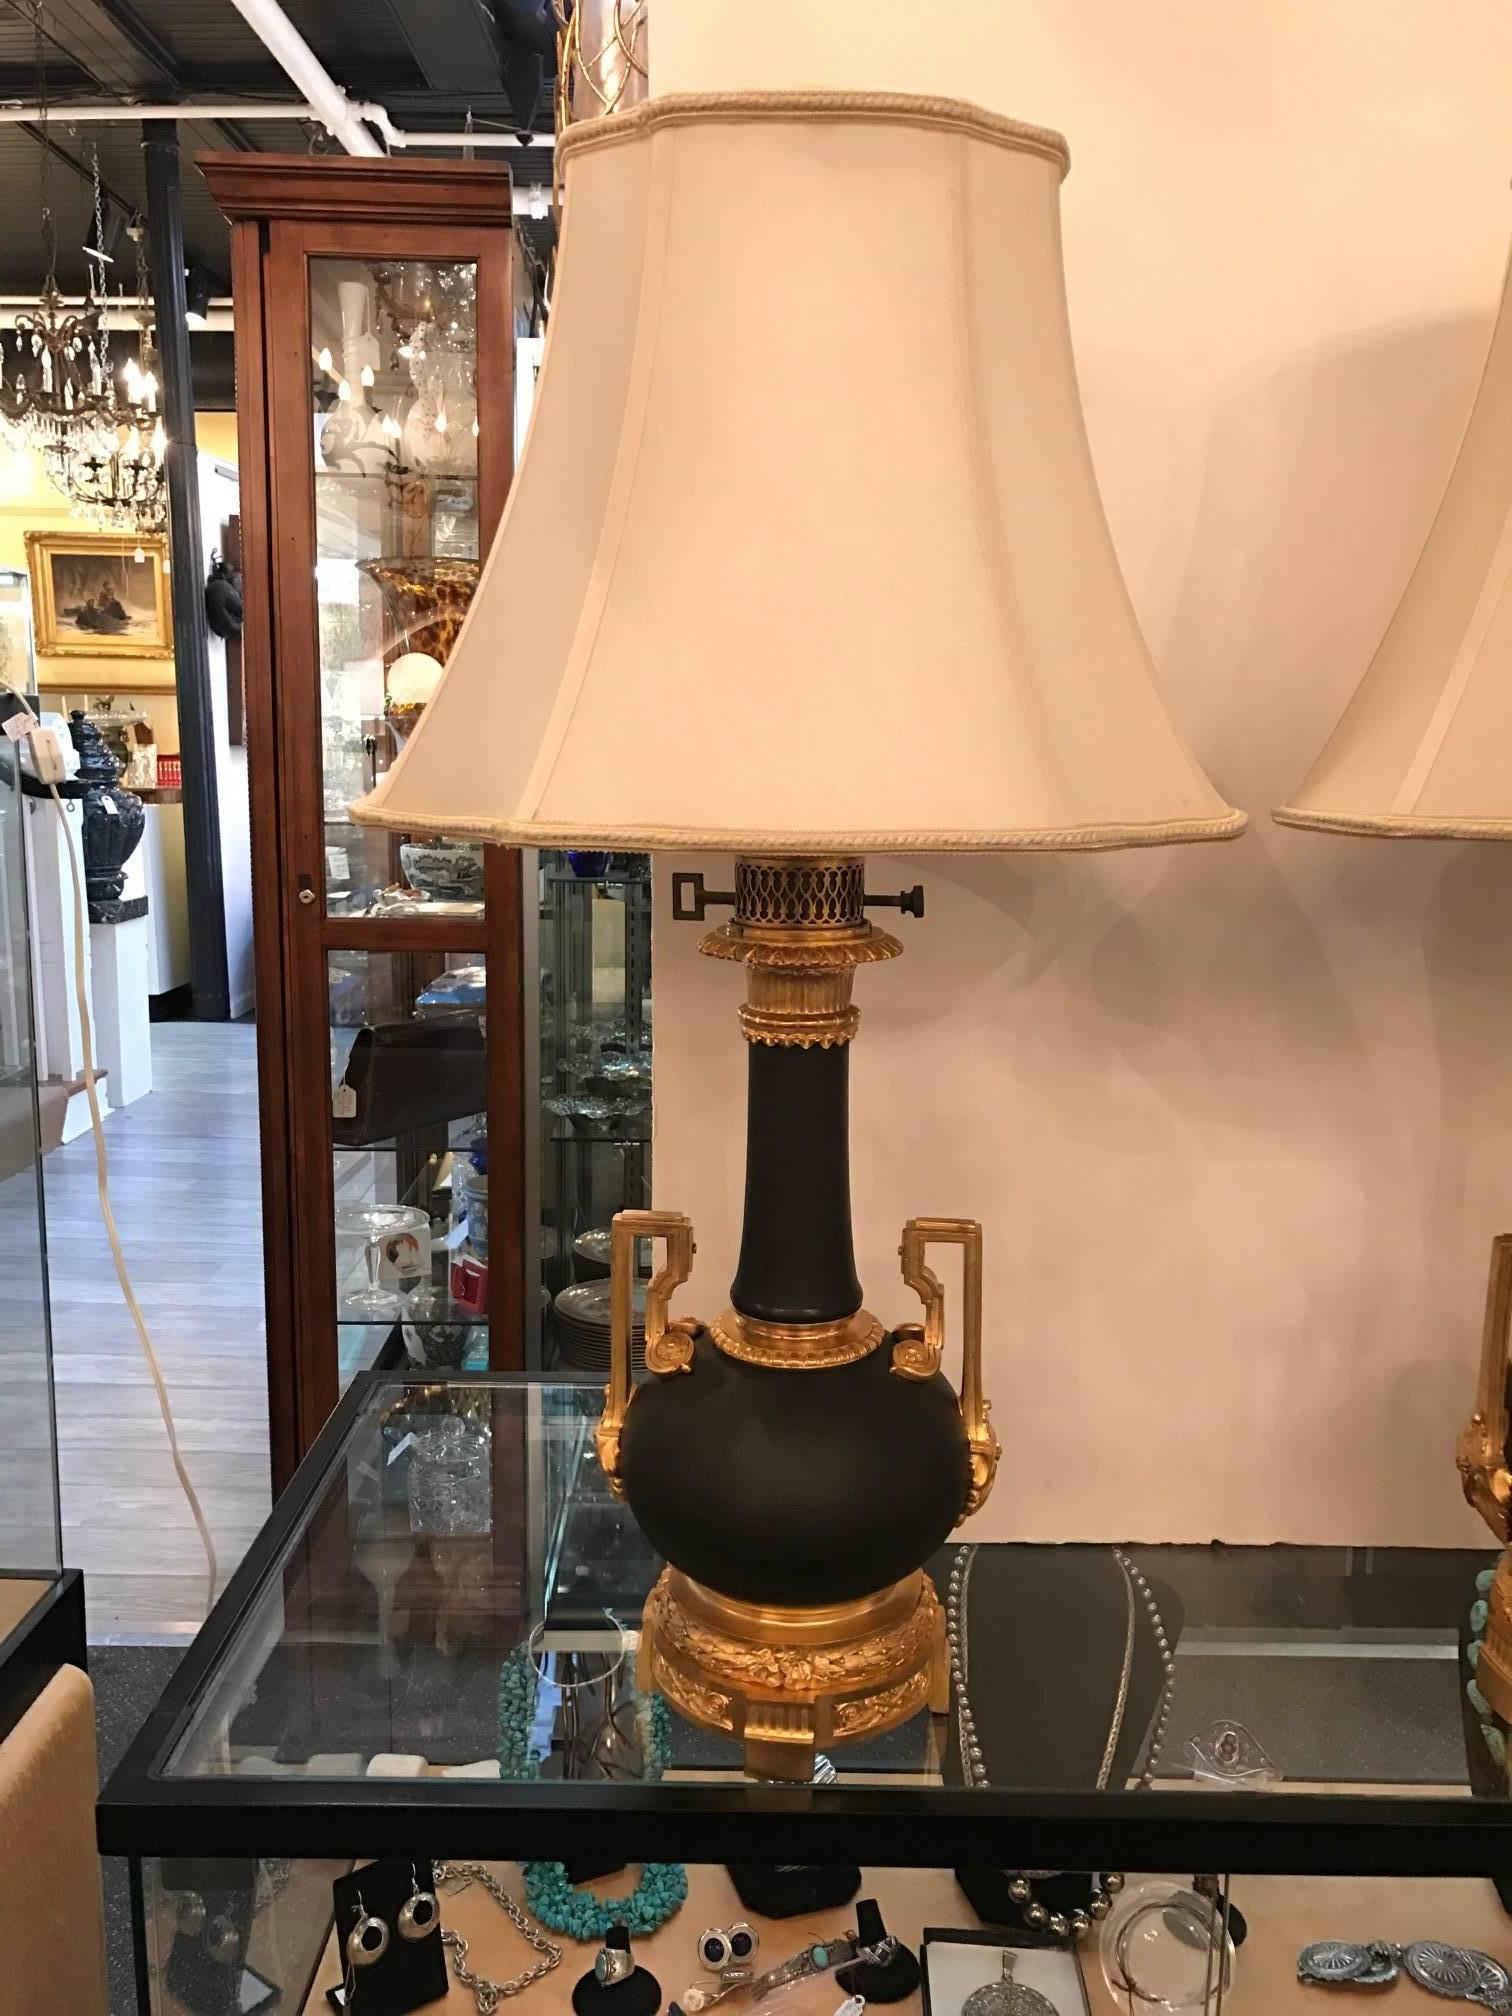 Exquisite pair of French oil Lamps now electrified. The patinated bronze bodies with slight braided texture with cast bronze gold plated mounts, made by the famous Bronze maker Gagneau in Paris on 115 Rue Lafayette.
The lamp is 18 inches high to